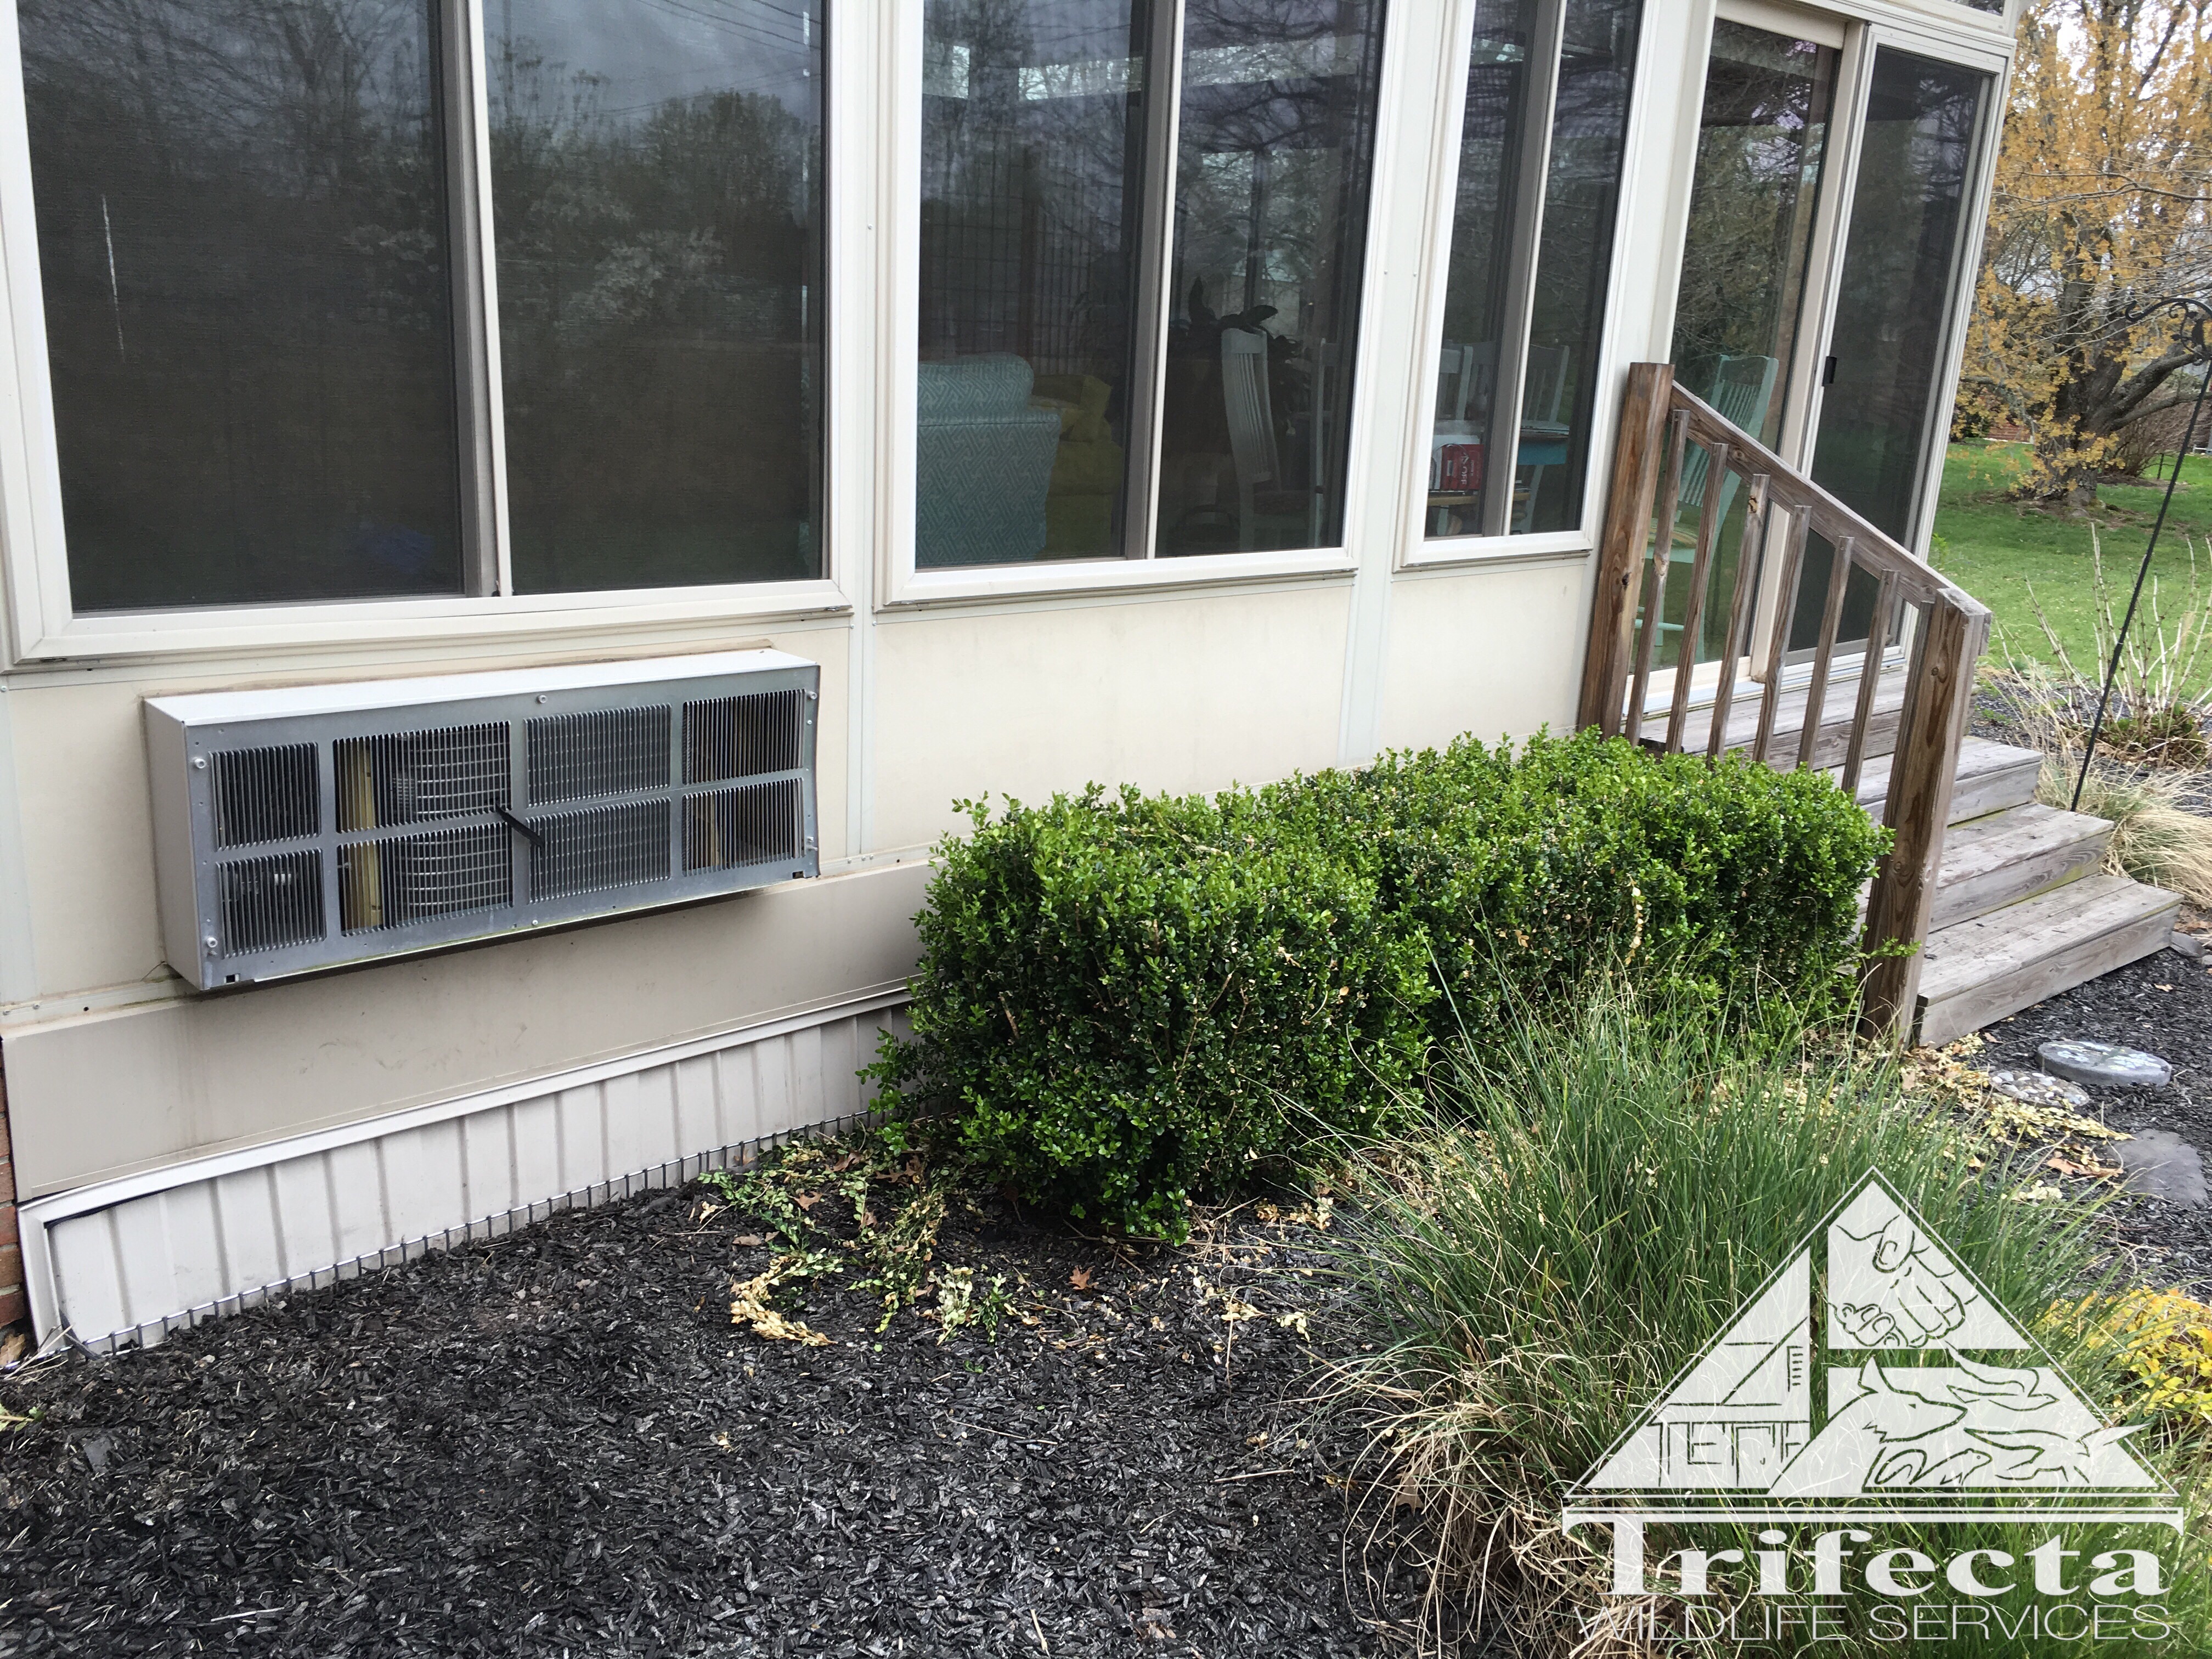 dig-defence-finished-install-central-ky | Trifecta Wildlife Services